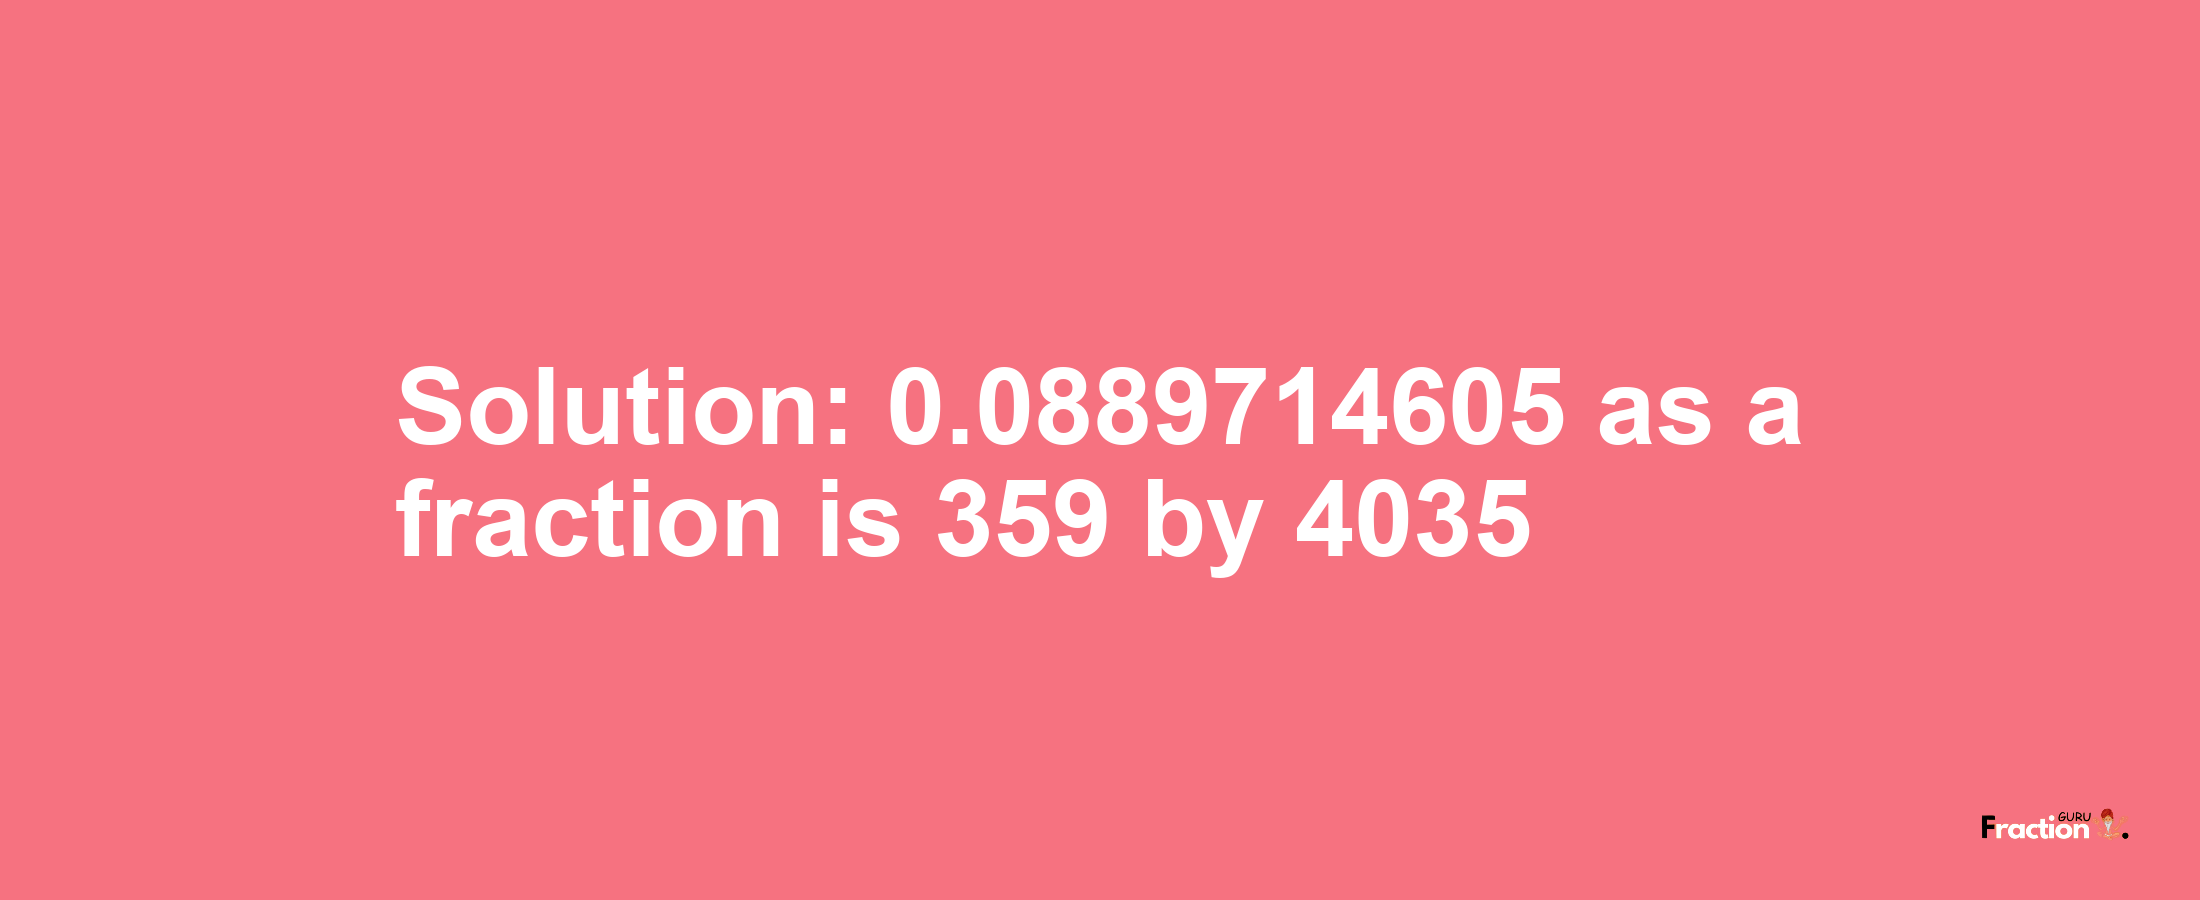 Solution:0.0889714605 as a fraction is 359/4035